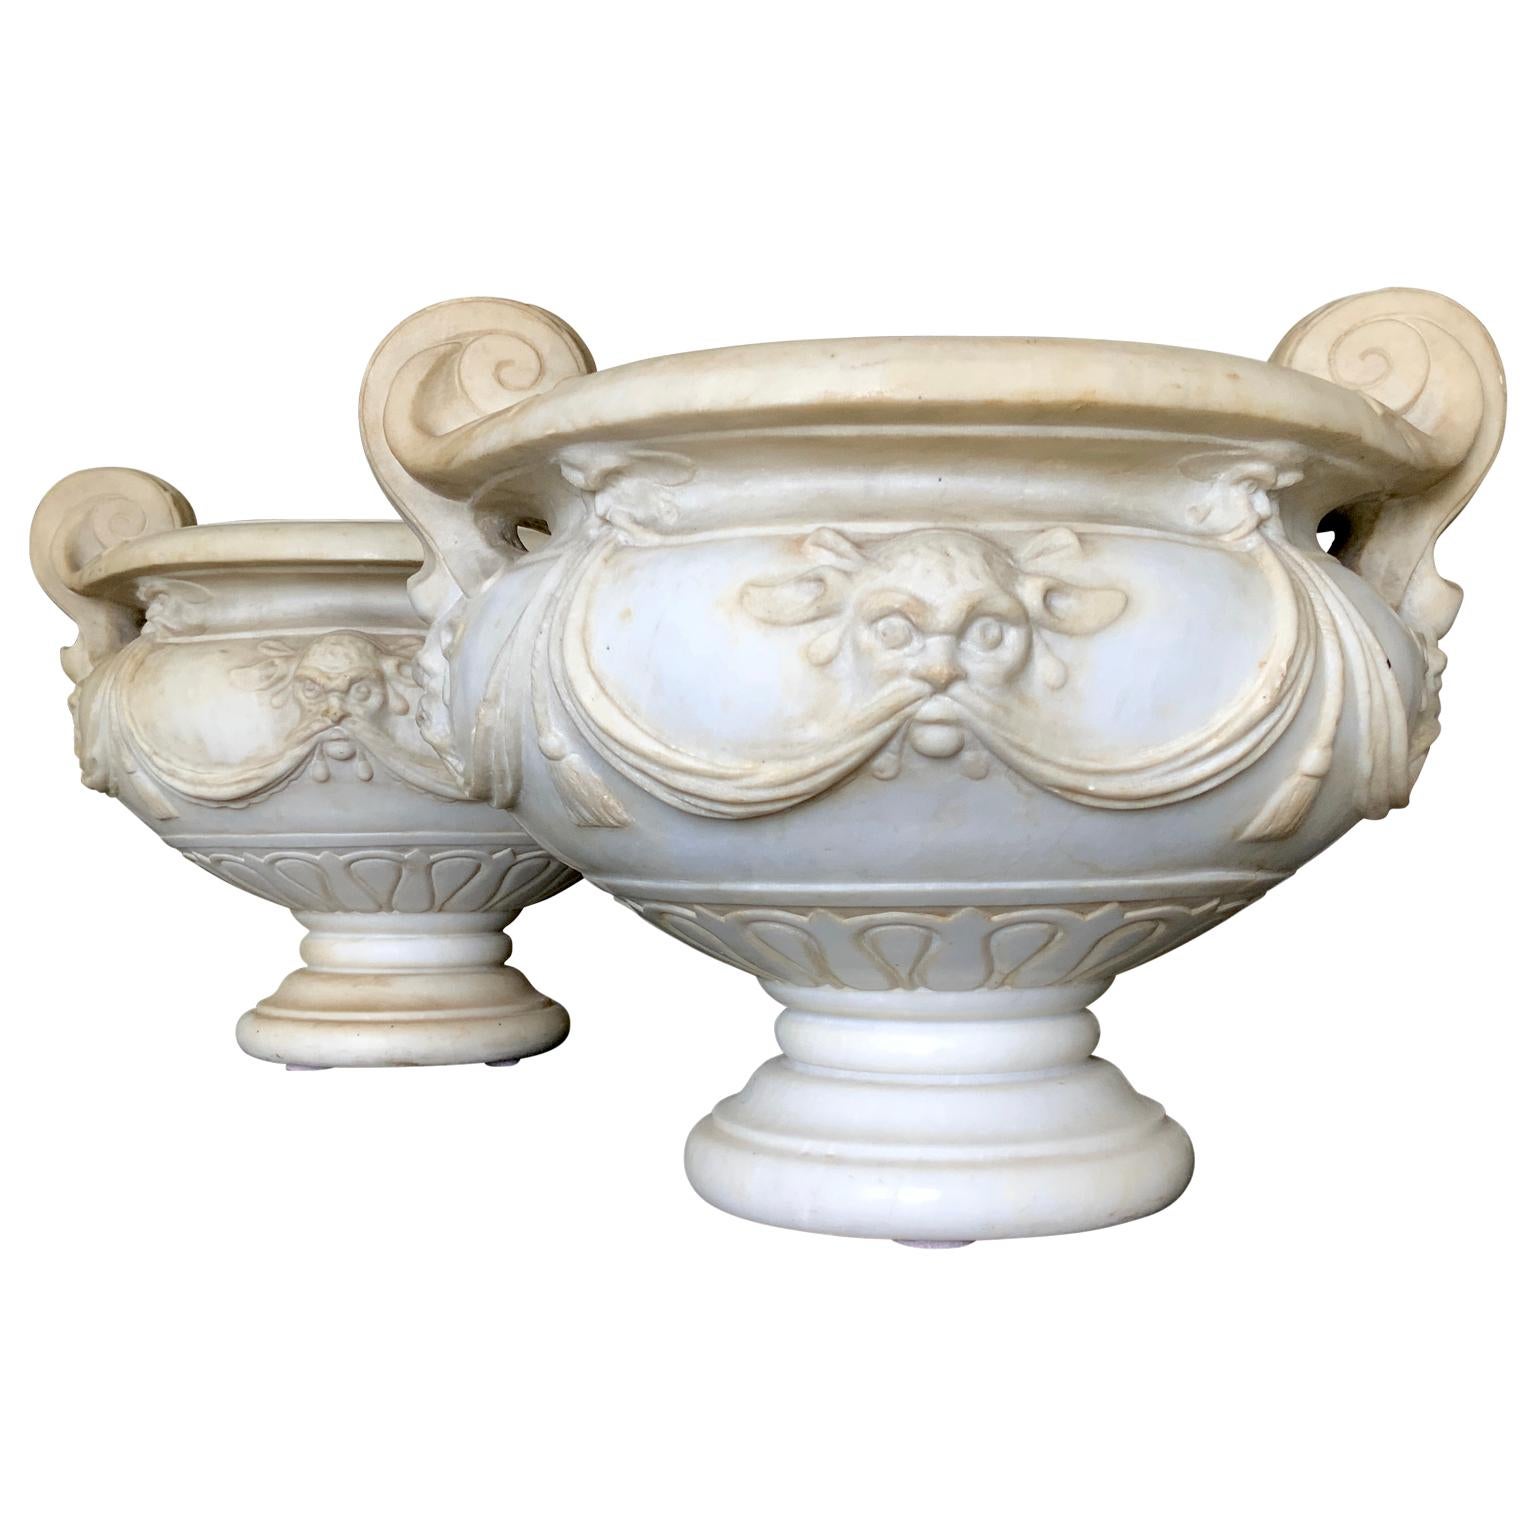 Hand-Carved Pair of 18th Century Carved White Marble Garden Urns, Italy